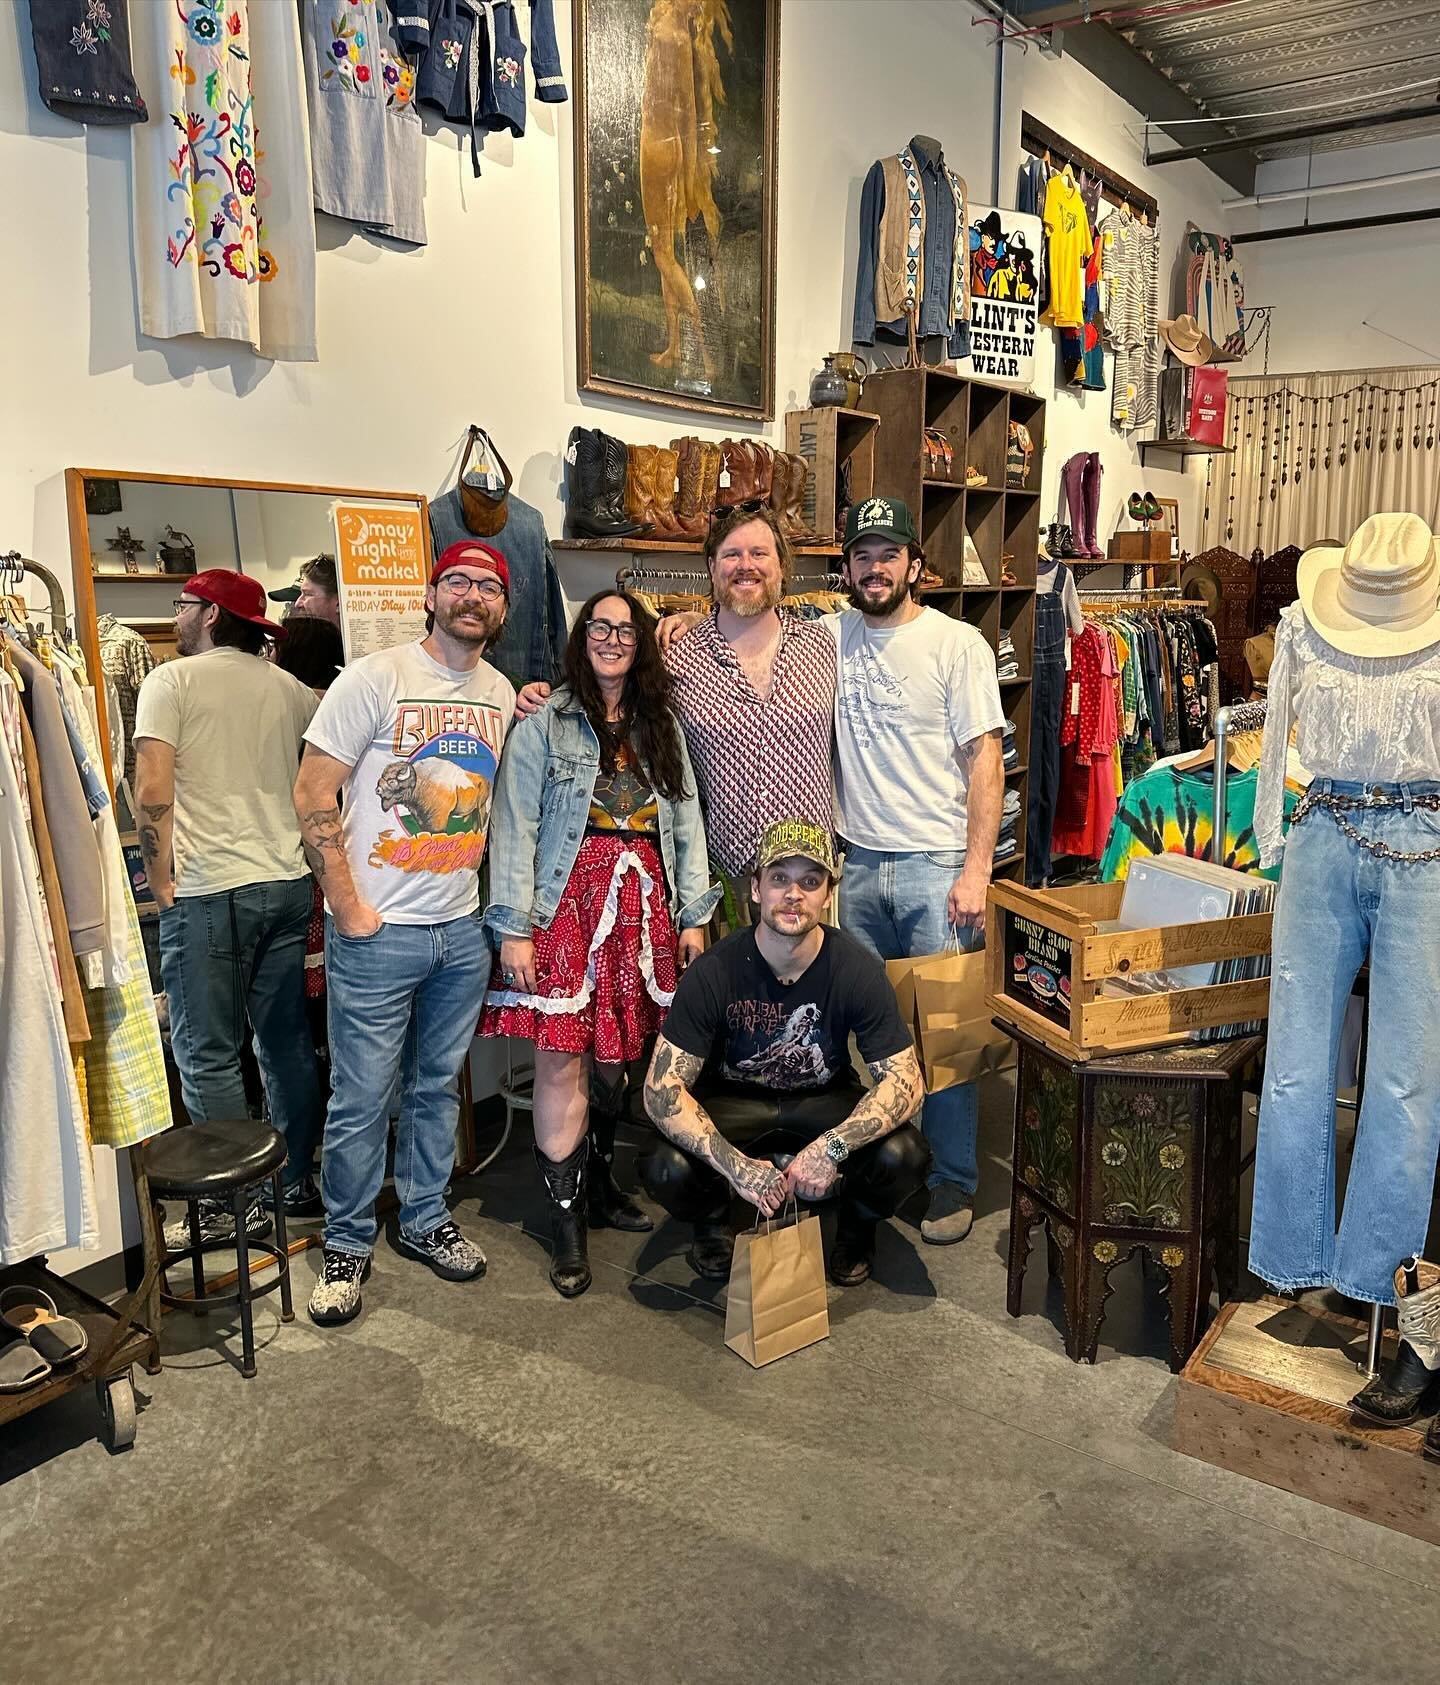 Loved having half of @zachlanebryan&rsquo;s band in the shop this morning! If you&rsquo;re going to the show tonight look for @readconnolly in a killer denim suit from Mays!

An absolute pleasure to have y&rsquo;all in today! Best of luck on the rest